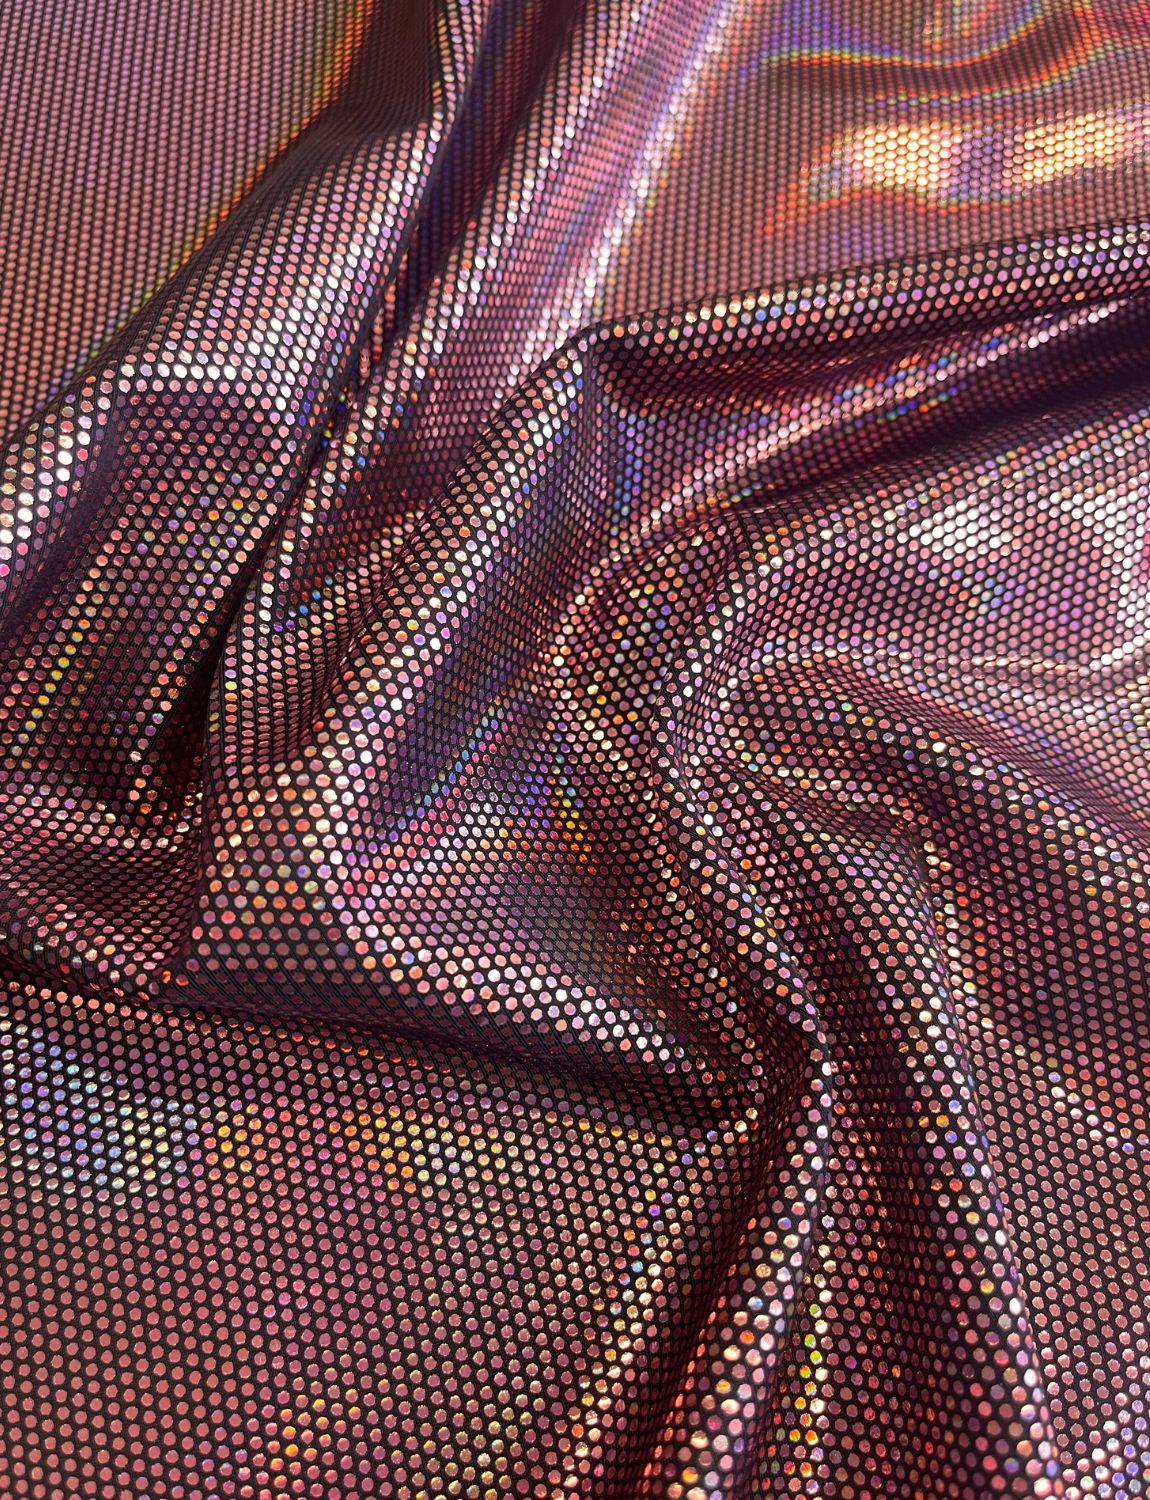 Pink holographic spotted foil on black stretch fabric.